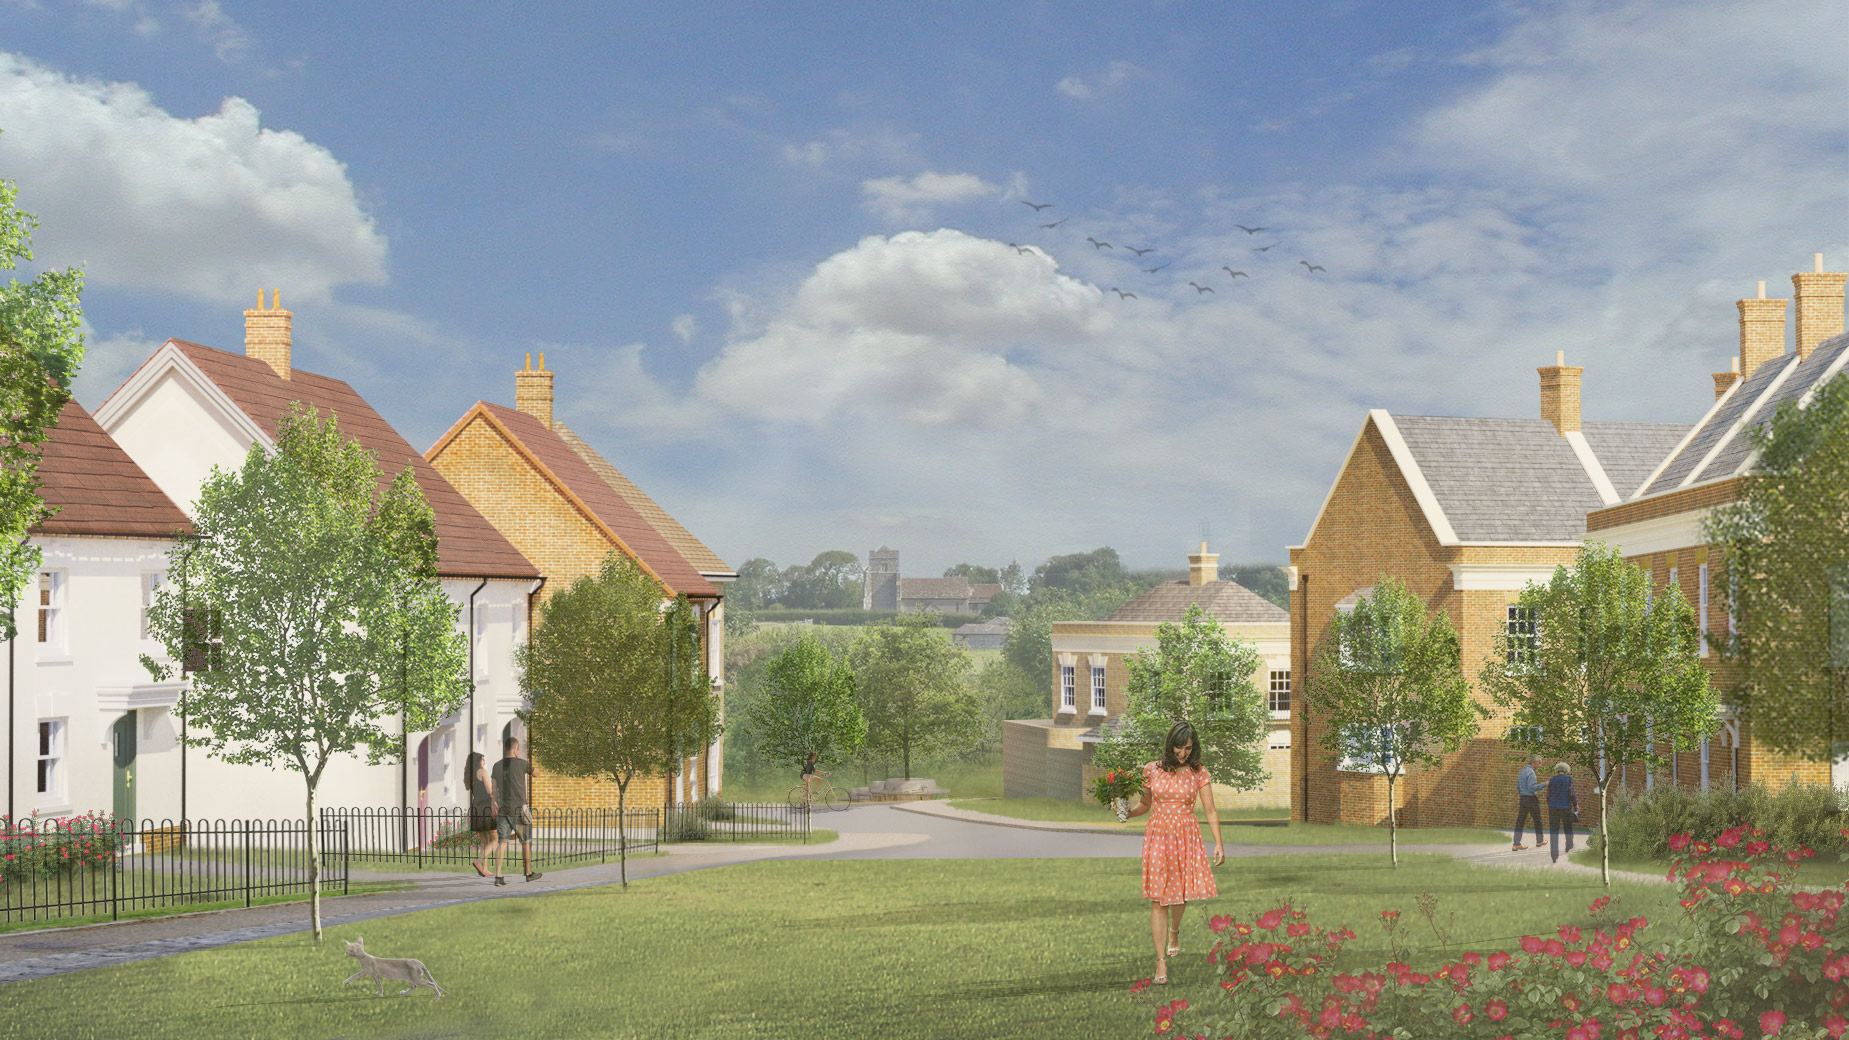 visual of new houses from street view with church in the distance